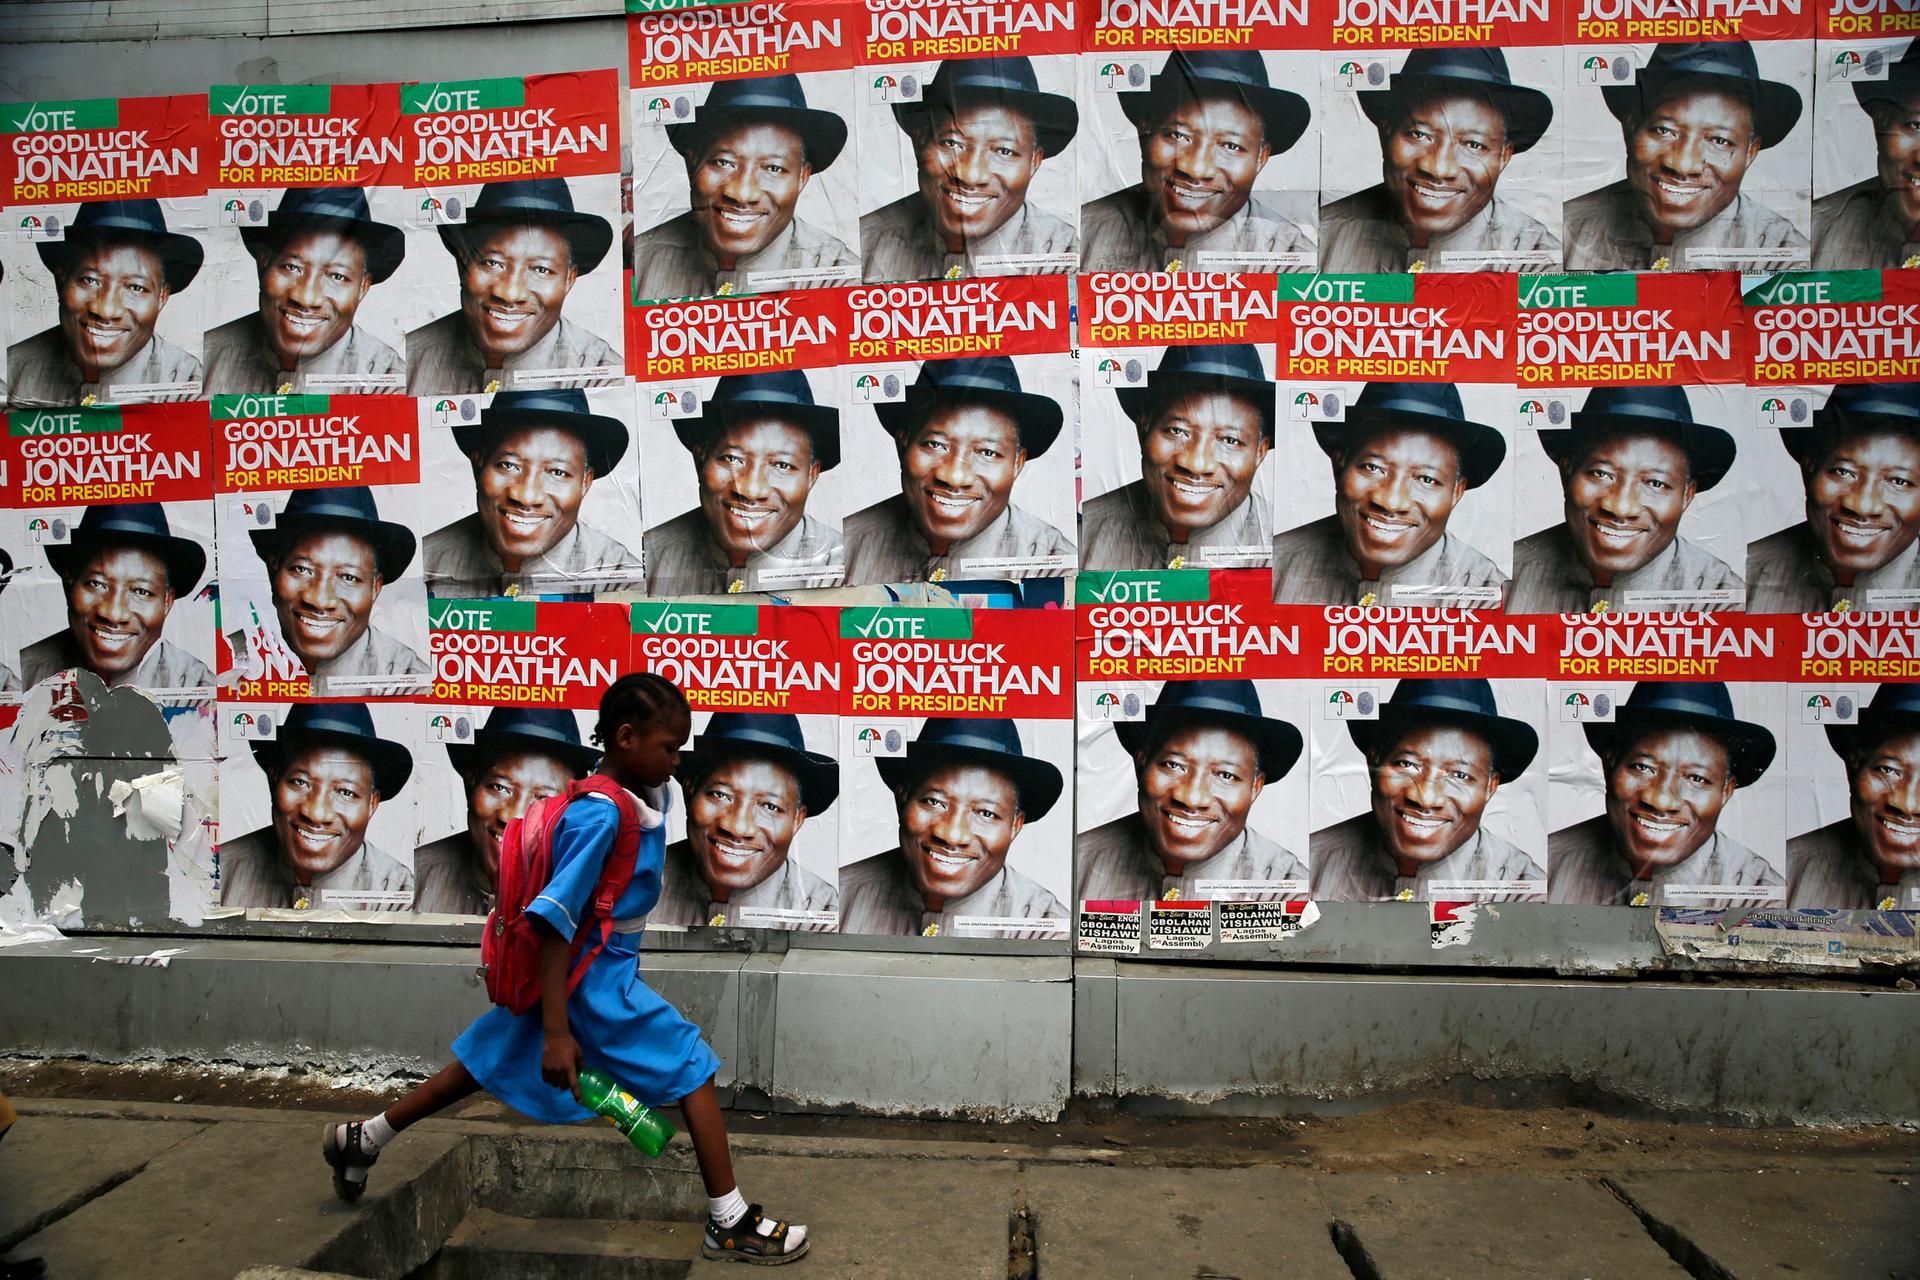 A schoolgirl walks past campaign posters in support of Nigeria's President Goodluck Jonathan along a road in Ikoyi district in Lagos.